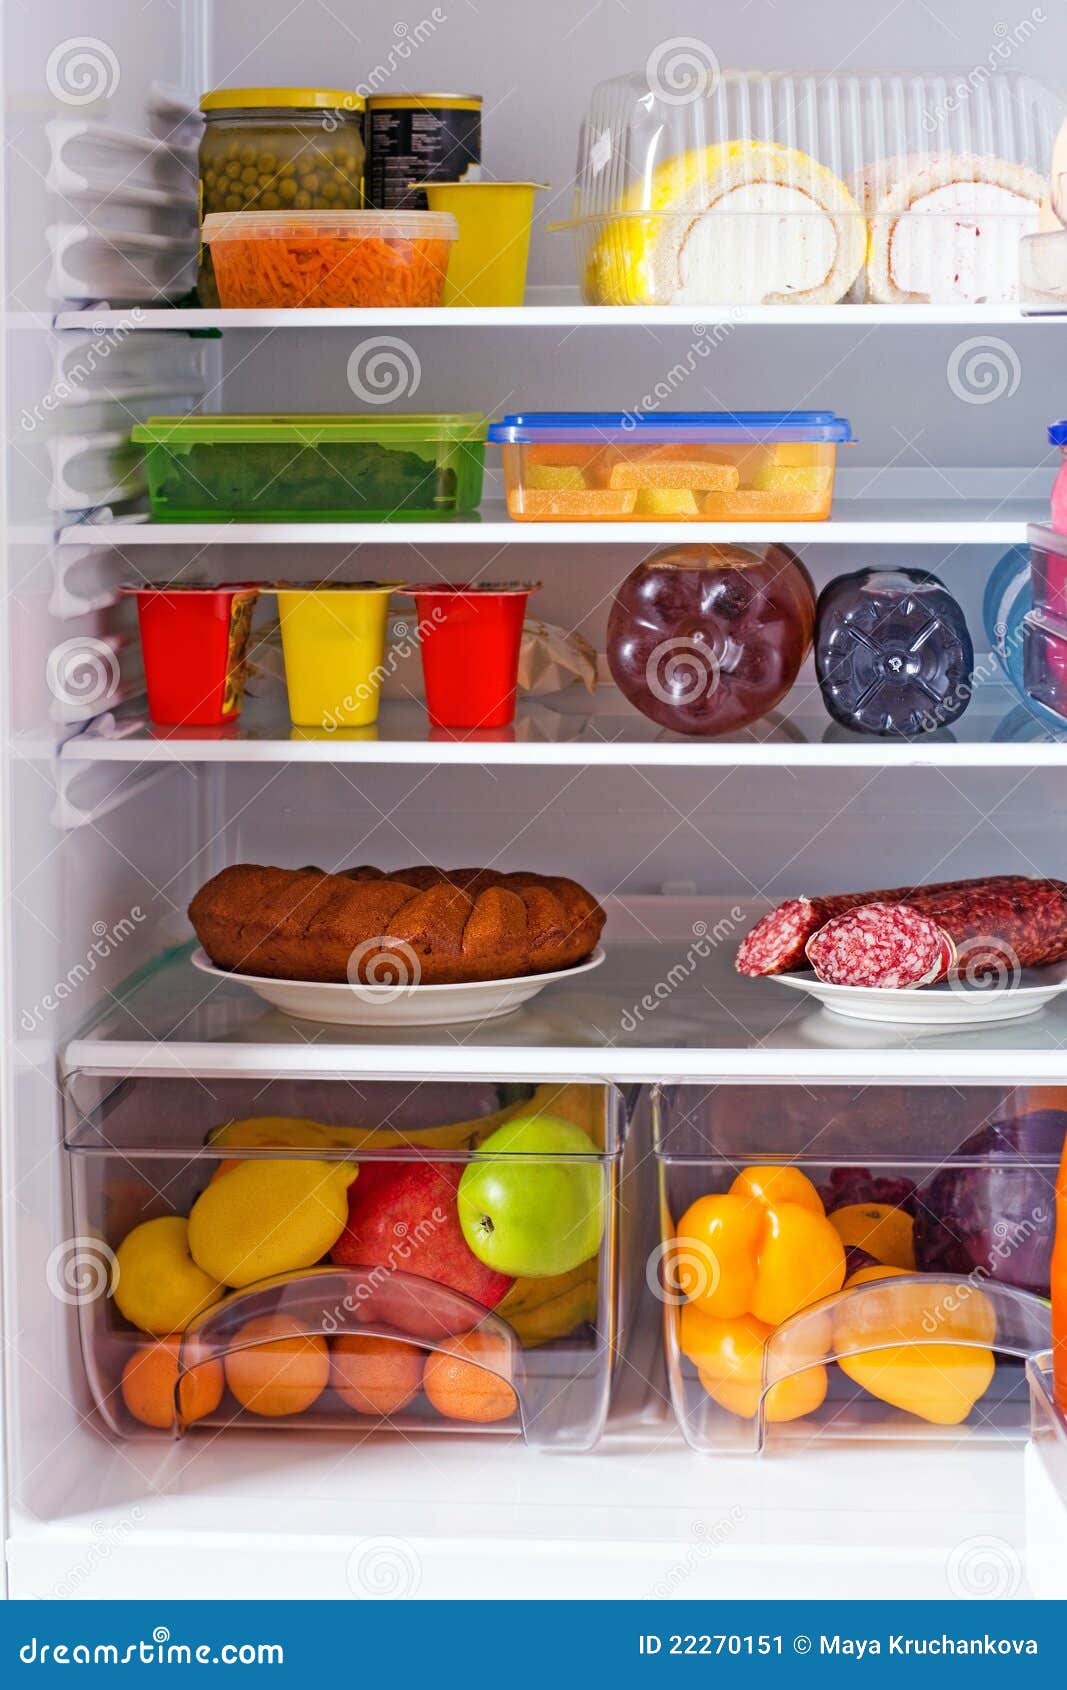 10 foods and vegetables that should not be frozen in the refrigerator ...